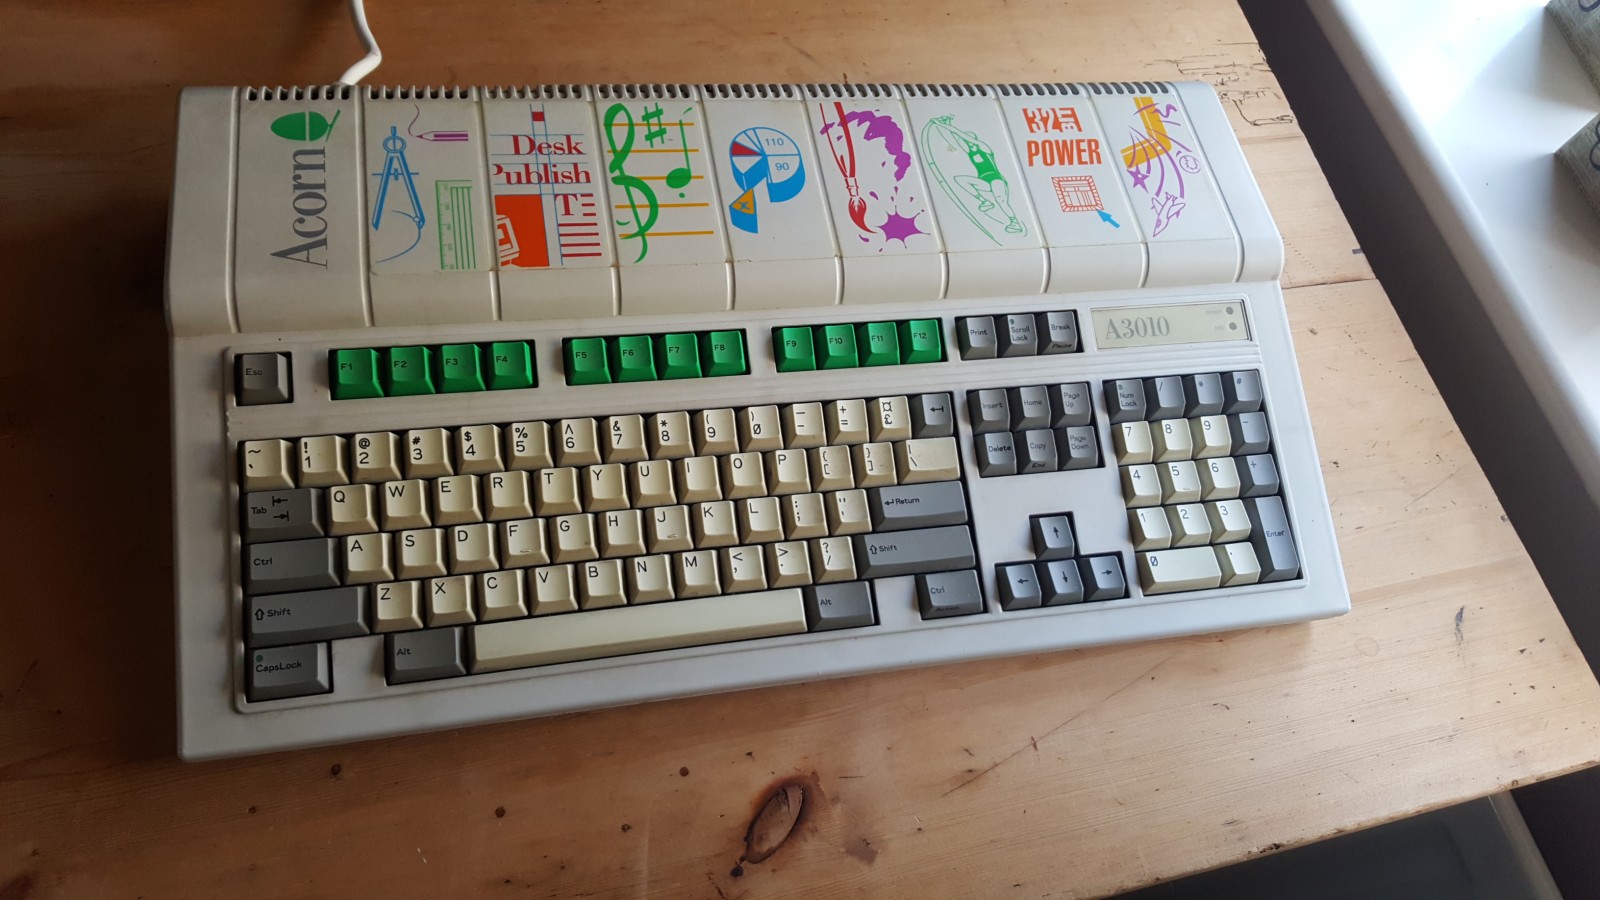 My Acorn Archimedes A3010